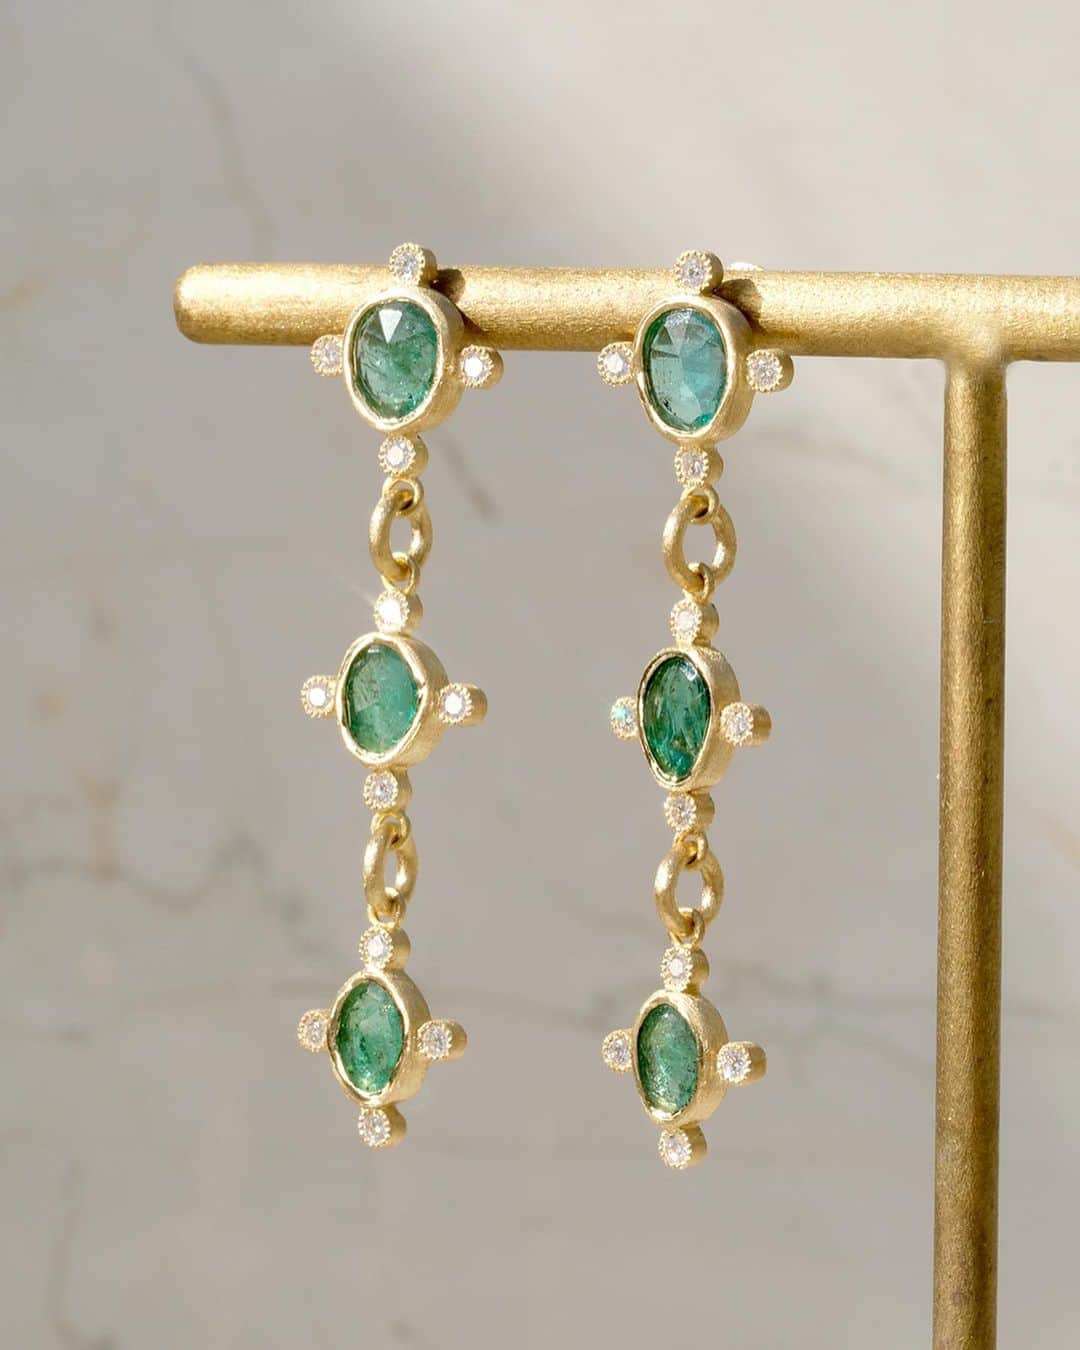 muskaのインスタグラム：「"bir" Emerald and diamond station earrings 18kYG, Emerald (Total 1.71ct) , Diamond ⁡ 風に揺れ、光を受けて煌めきを放つエメラルドピアス。若葉のような涼やかなエメラルドを讃え、VS1クラリティのダイヤモンドを組み合わせたエレガントな意匠は、緻密な仕立てにより形作られます。どんな場面でも美しく耳元を飾る逸品です。 — These emerald earrings sway in the wind and sparkle in the light. The elegant design of the emerald, which is as delicate as new leaves, combined with VS1 clarity diamonds, is the result of the intricate and reliable craftsmanship. These earrings will beautifully adorn your ears for any occasion. ⁡ ⁡ #muskajewelry #the6thnight #emeraldearrings #emeraldjewelry #emeraldanddiamond #oneofakindjewelry #showmeyourearrings #エメラルド #エメラルドピアス #一点物ジュエリー #一点物ピアス #オーダーメイドジュエリー #第六夜」